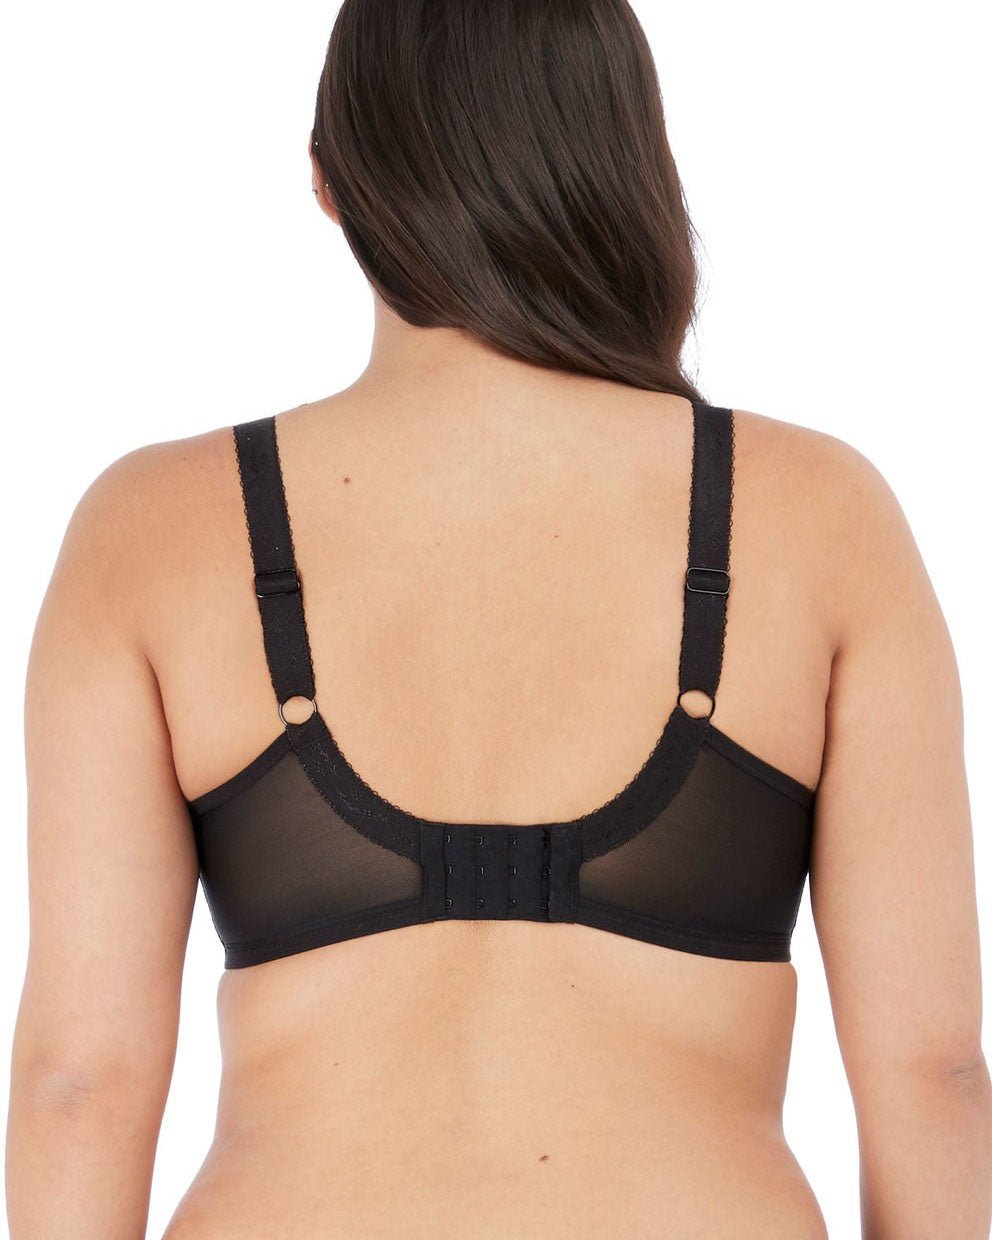 Elomi Brianna Padded Half Cup Bra - Black - An Intimate Affaire